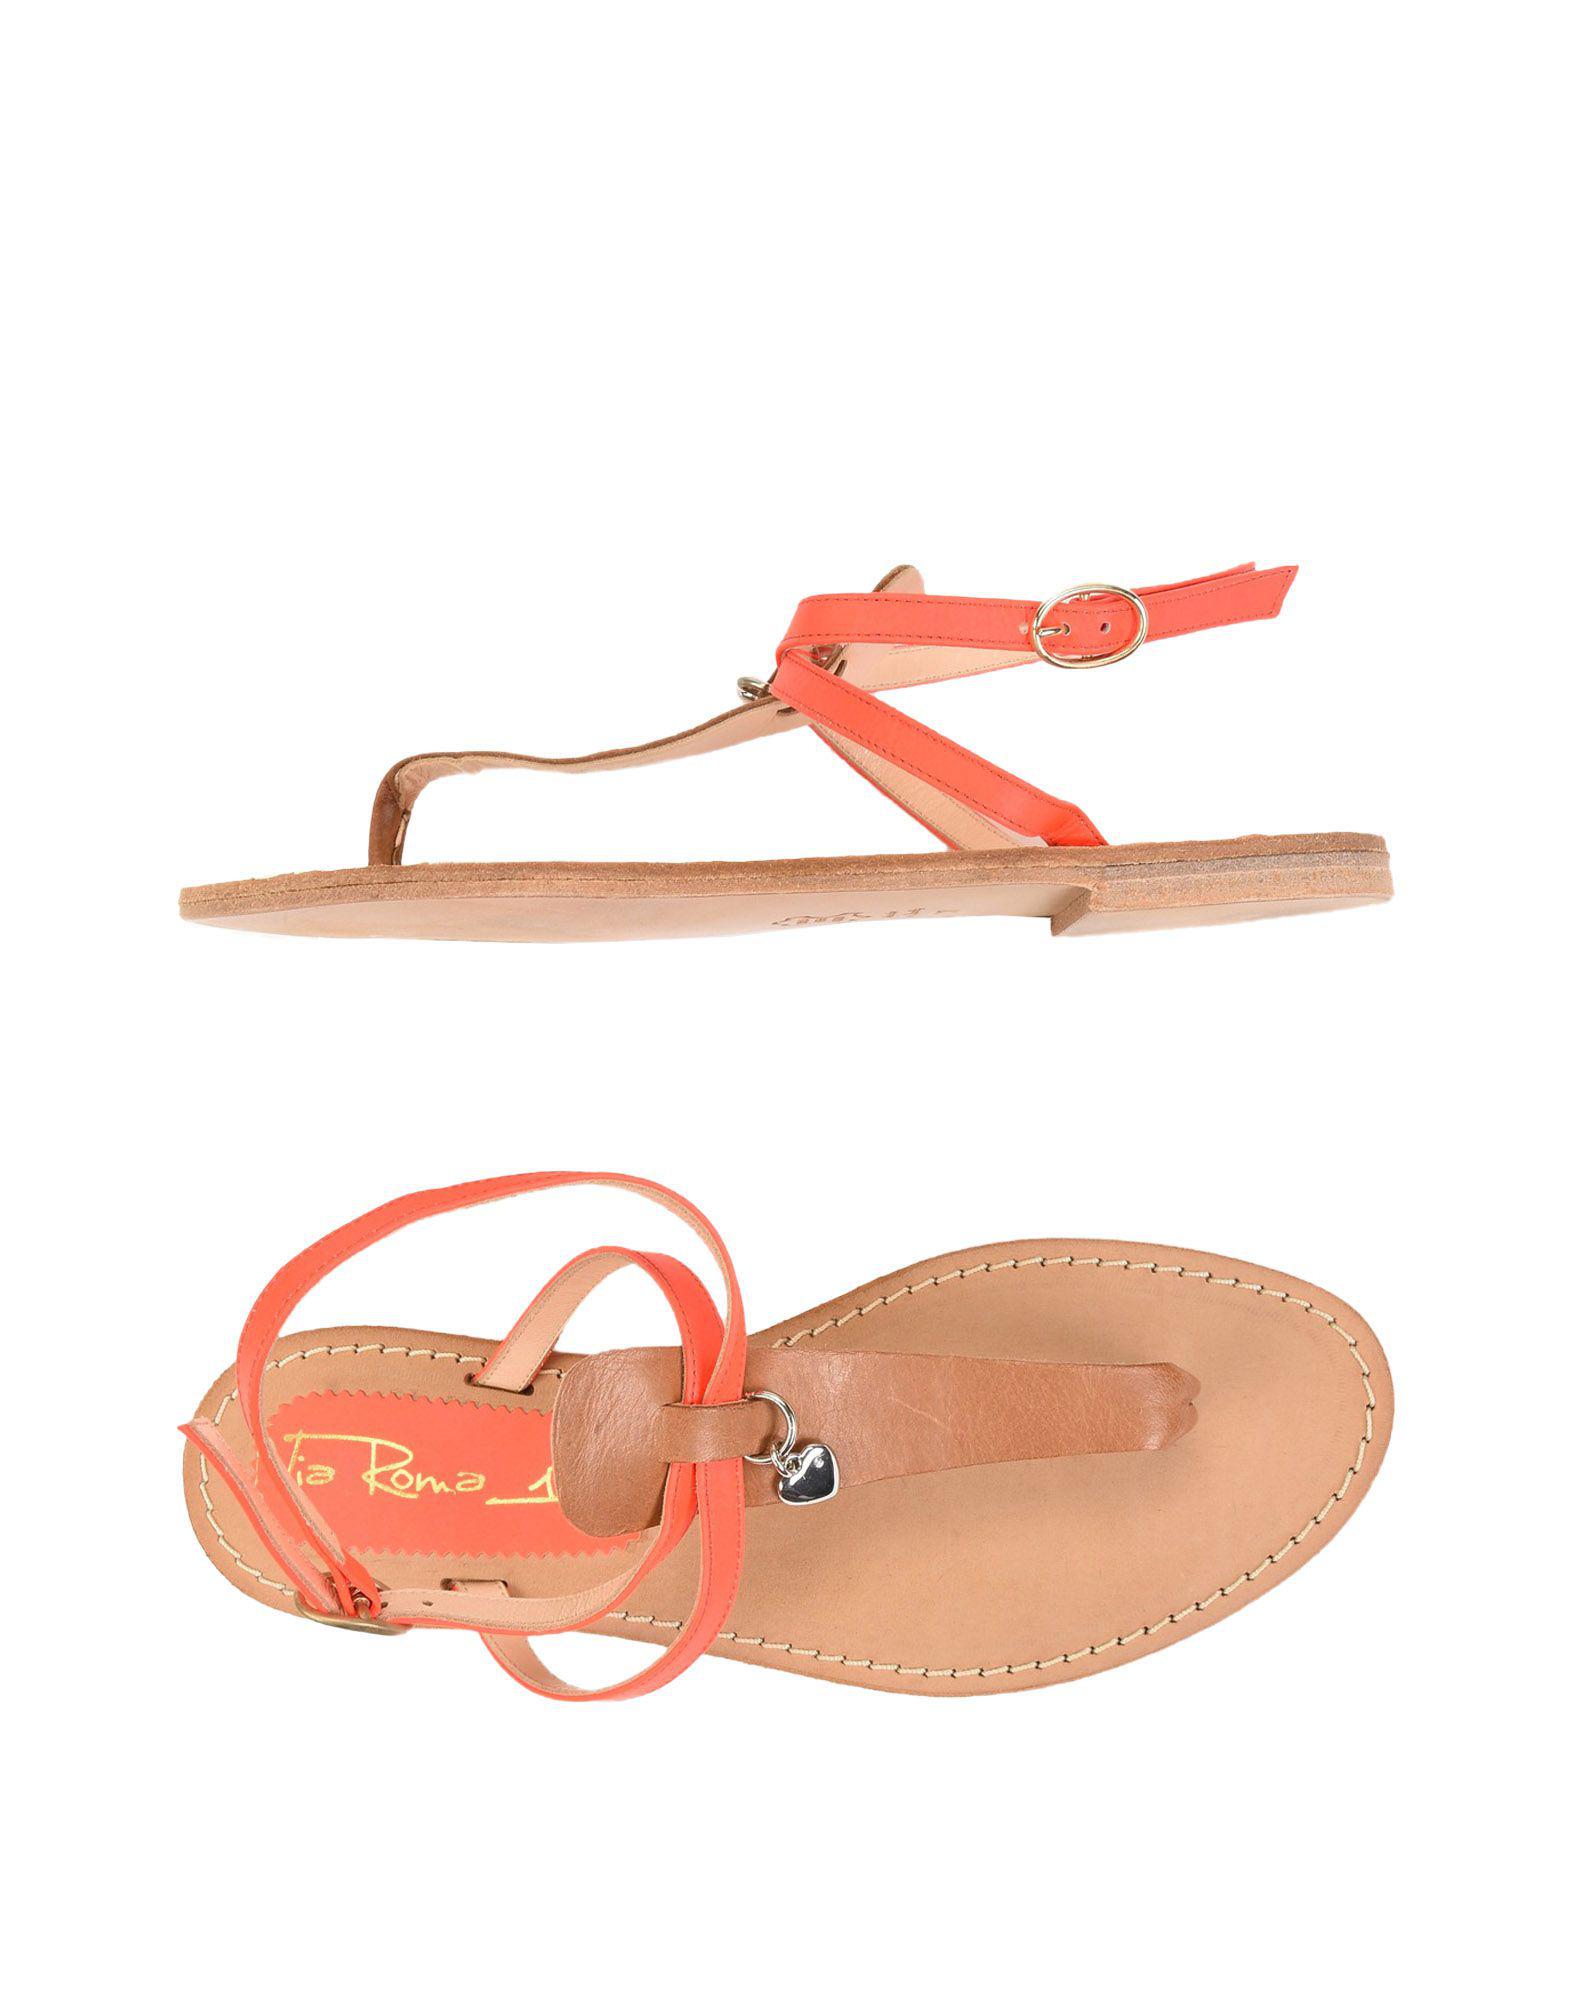 Via Roma 15 Leather Toe Post Sandal in Coral (Pink) - Lyst